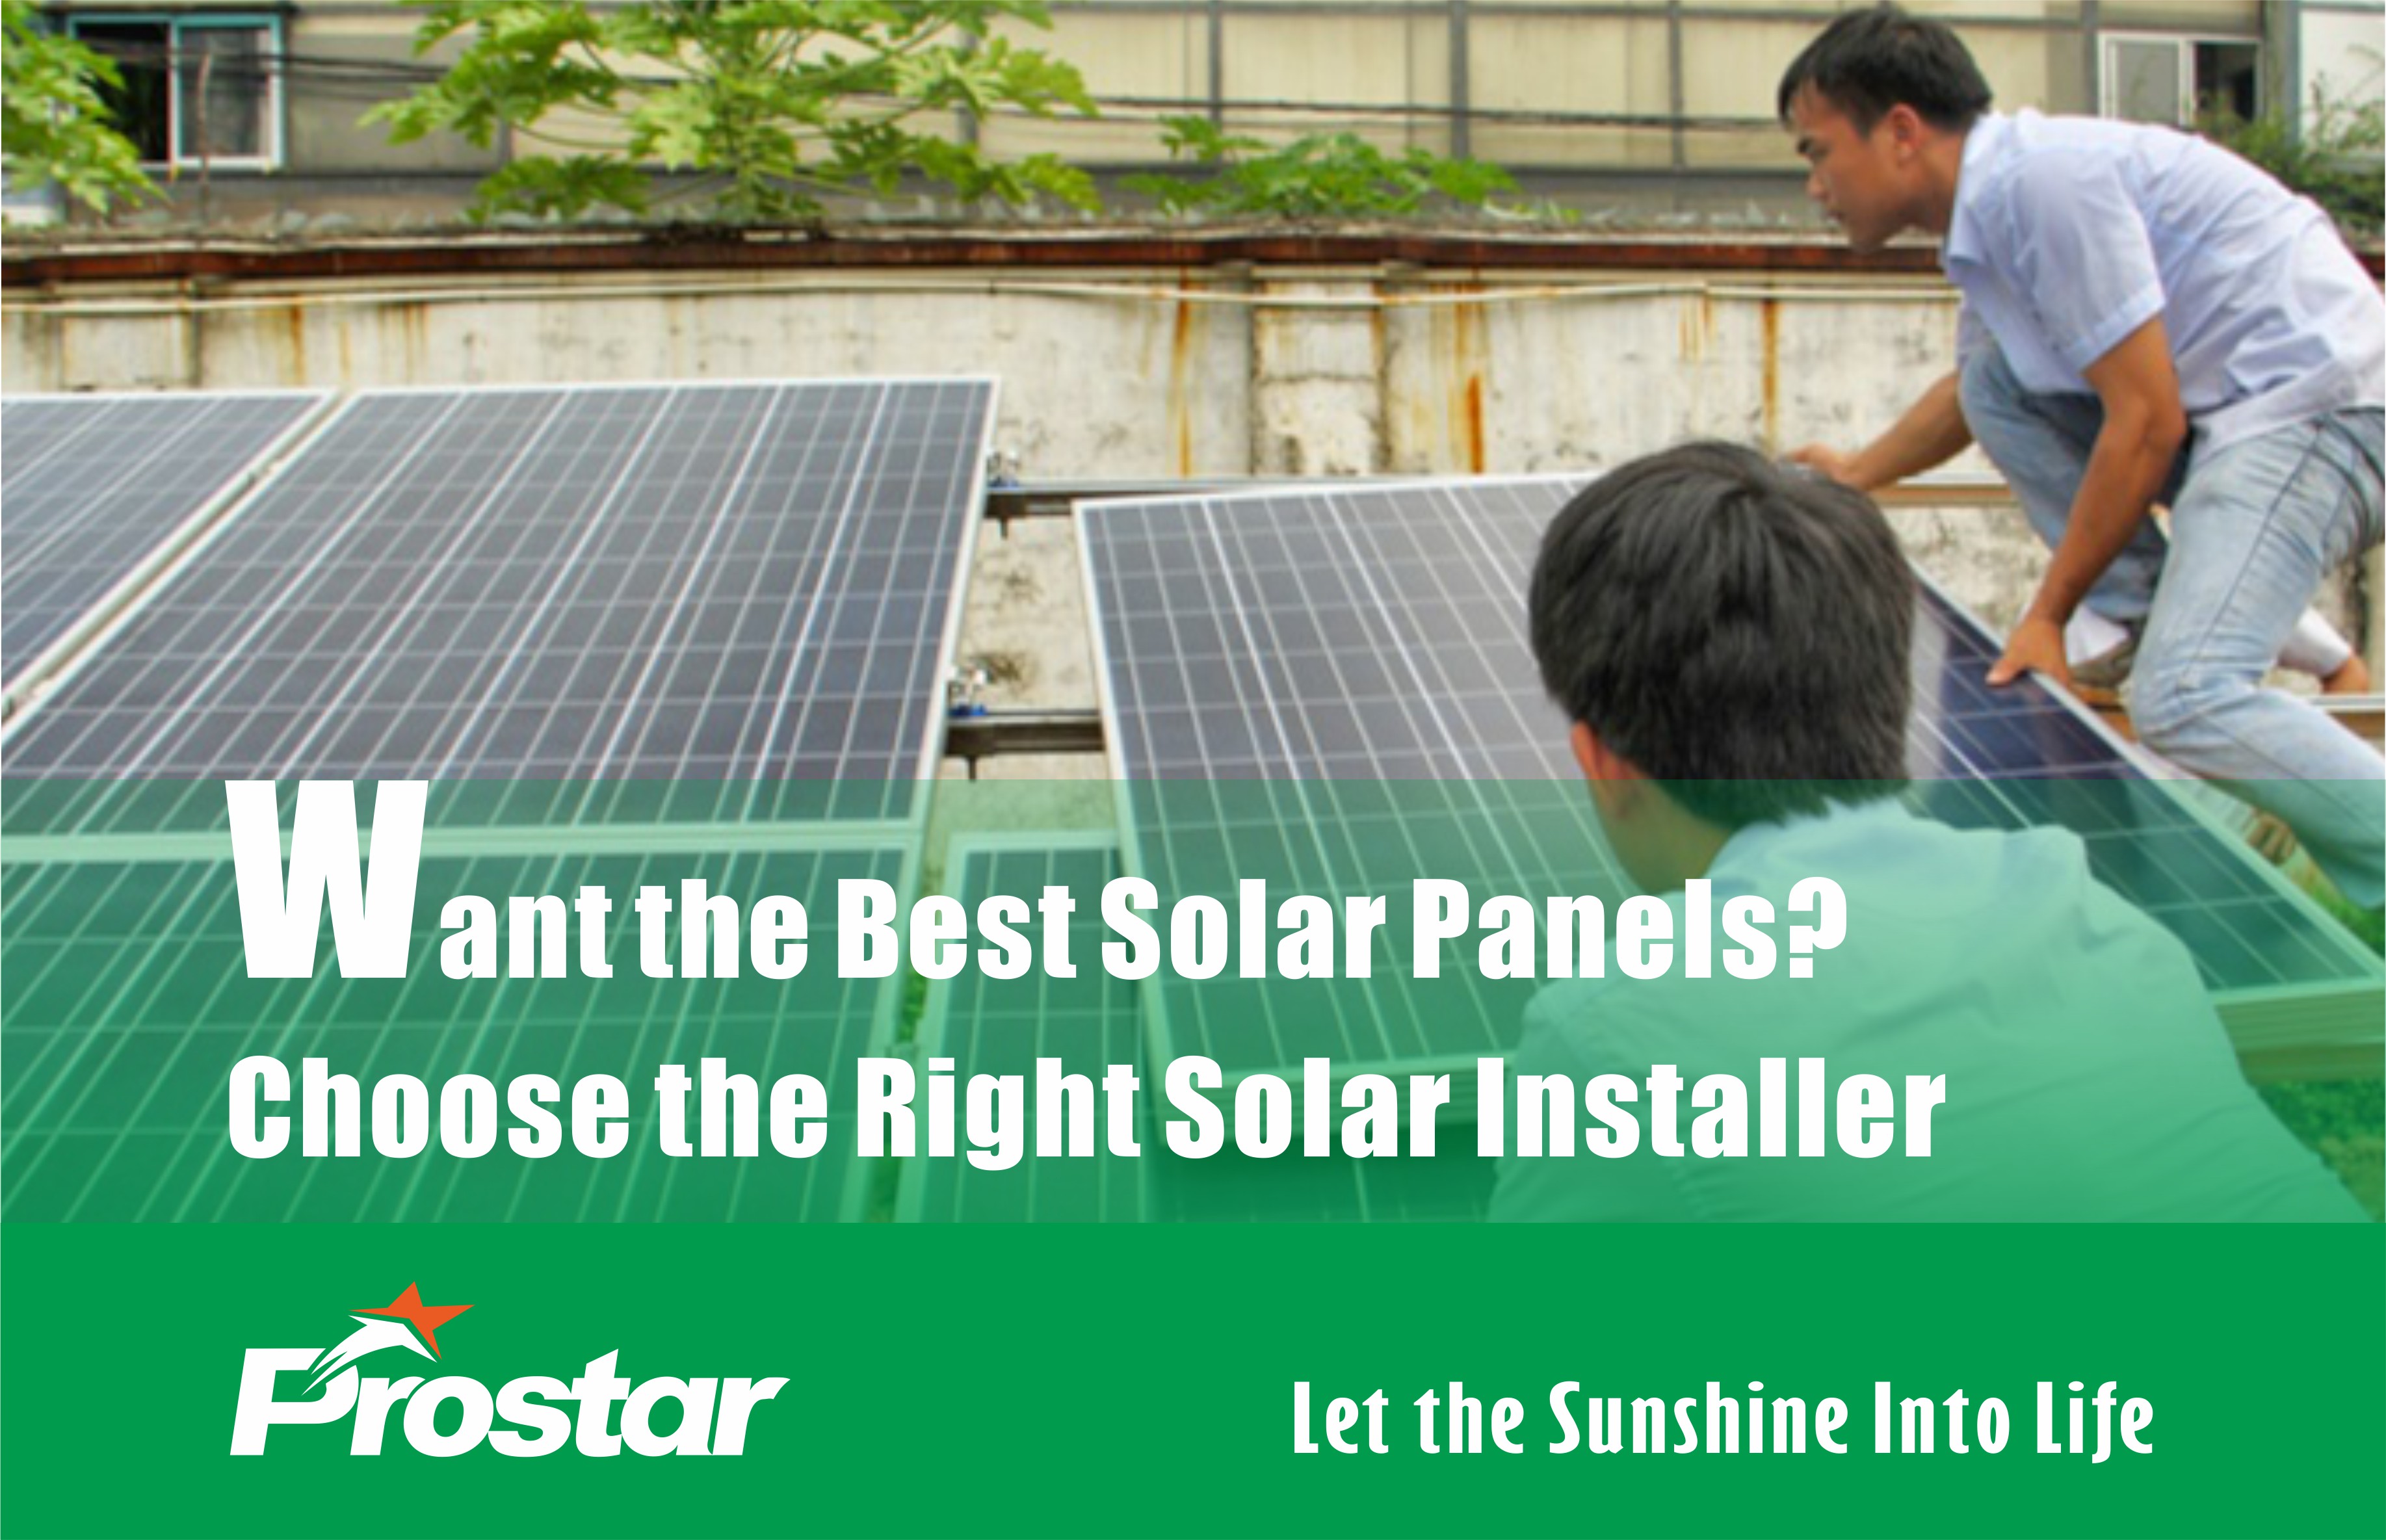 Want the Best Solar Panels? Choose the Right Solar Installer